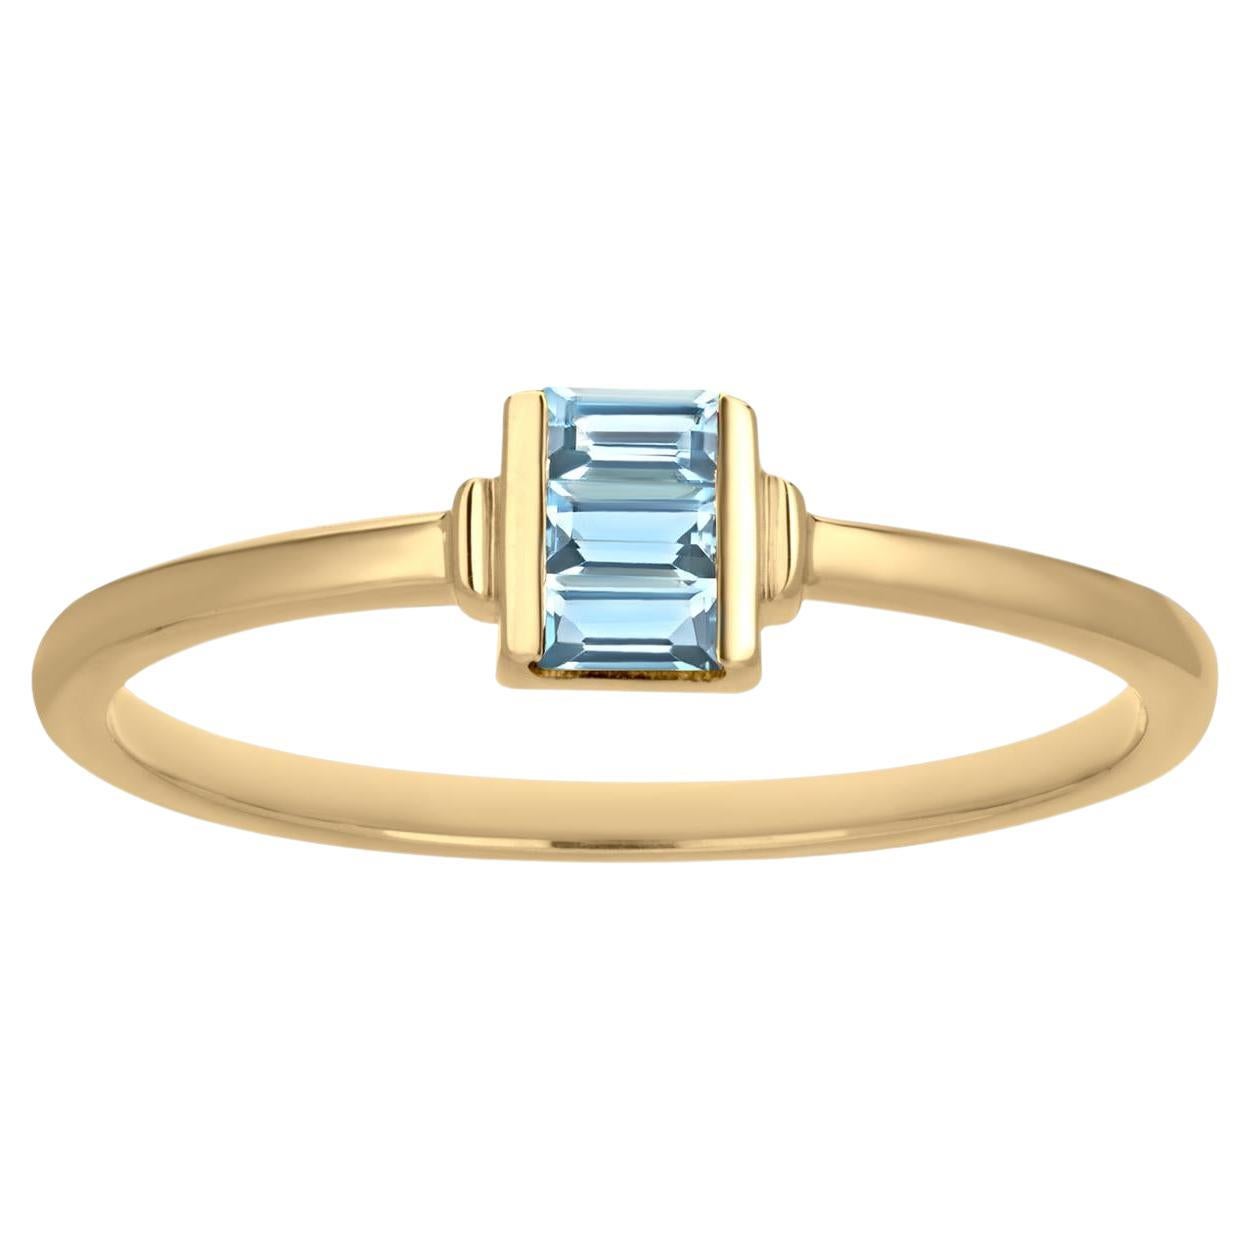 Gemistry 0.22 Cttw. Baguette-Shaped Blue Topaz Band Ring in 14k Yellow Gold For Sale